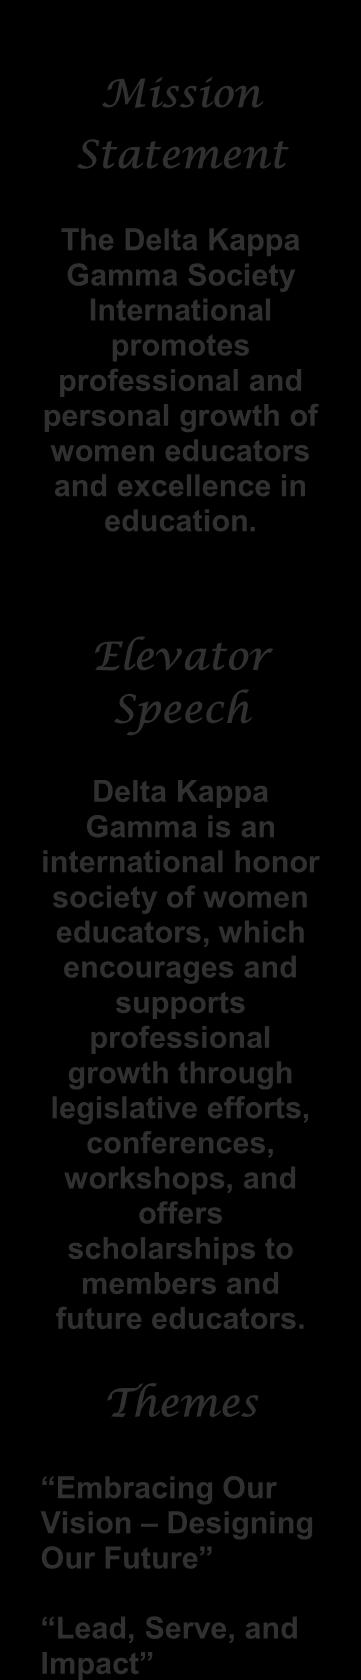 Delta Kappa Gamma From A to Z All the news from the Delta Kappa Gamma Society International Volume 58, Issue 2 December, 2013 Mecklenburg and Union Counties Mission Statement The Delta Kappa Gamma